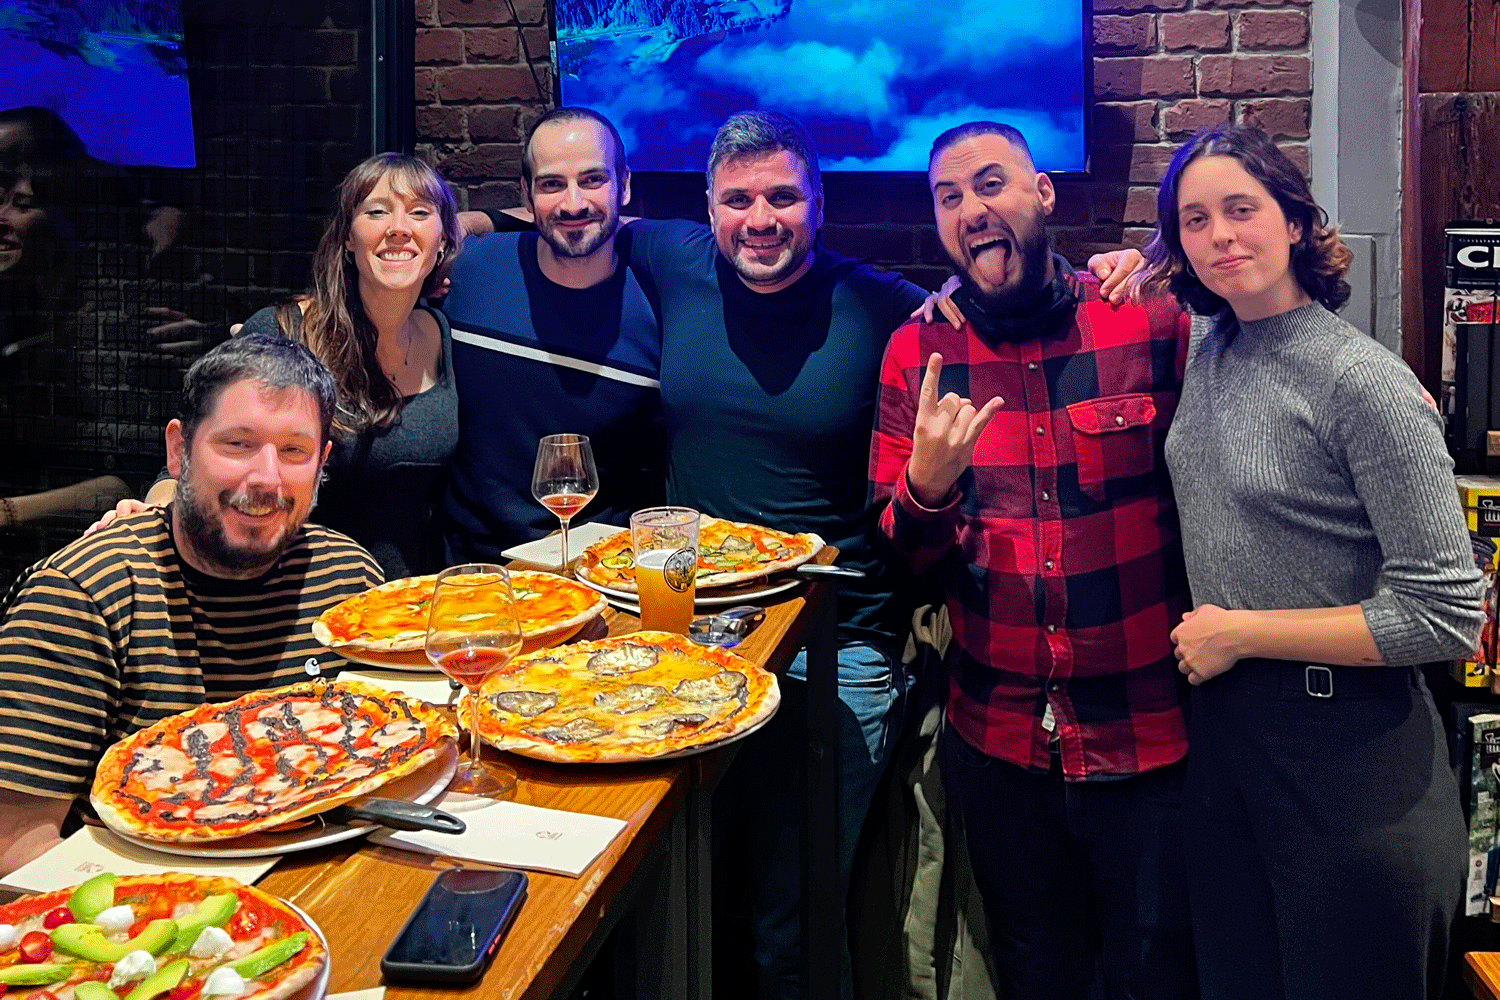 Stomio team having fun with pizza and beers